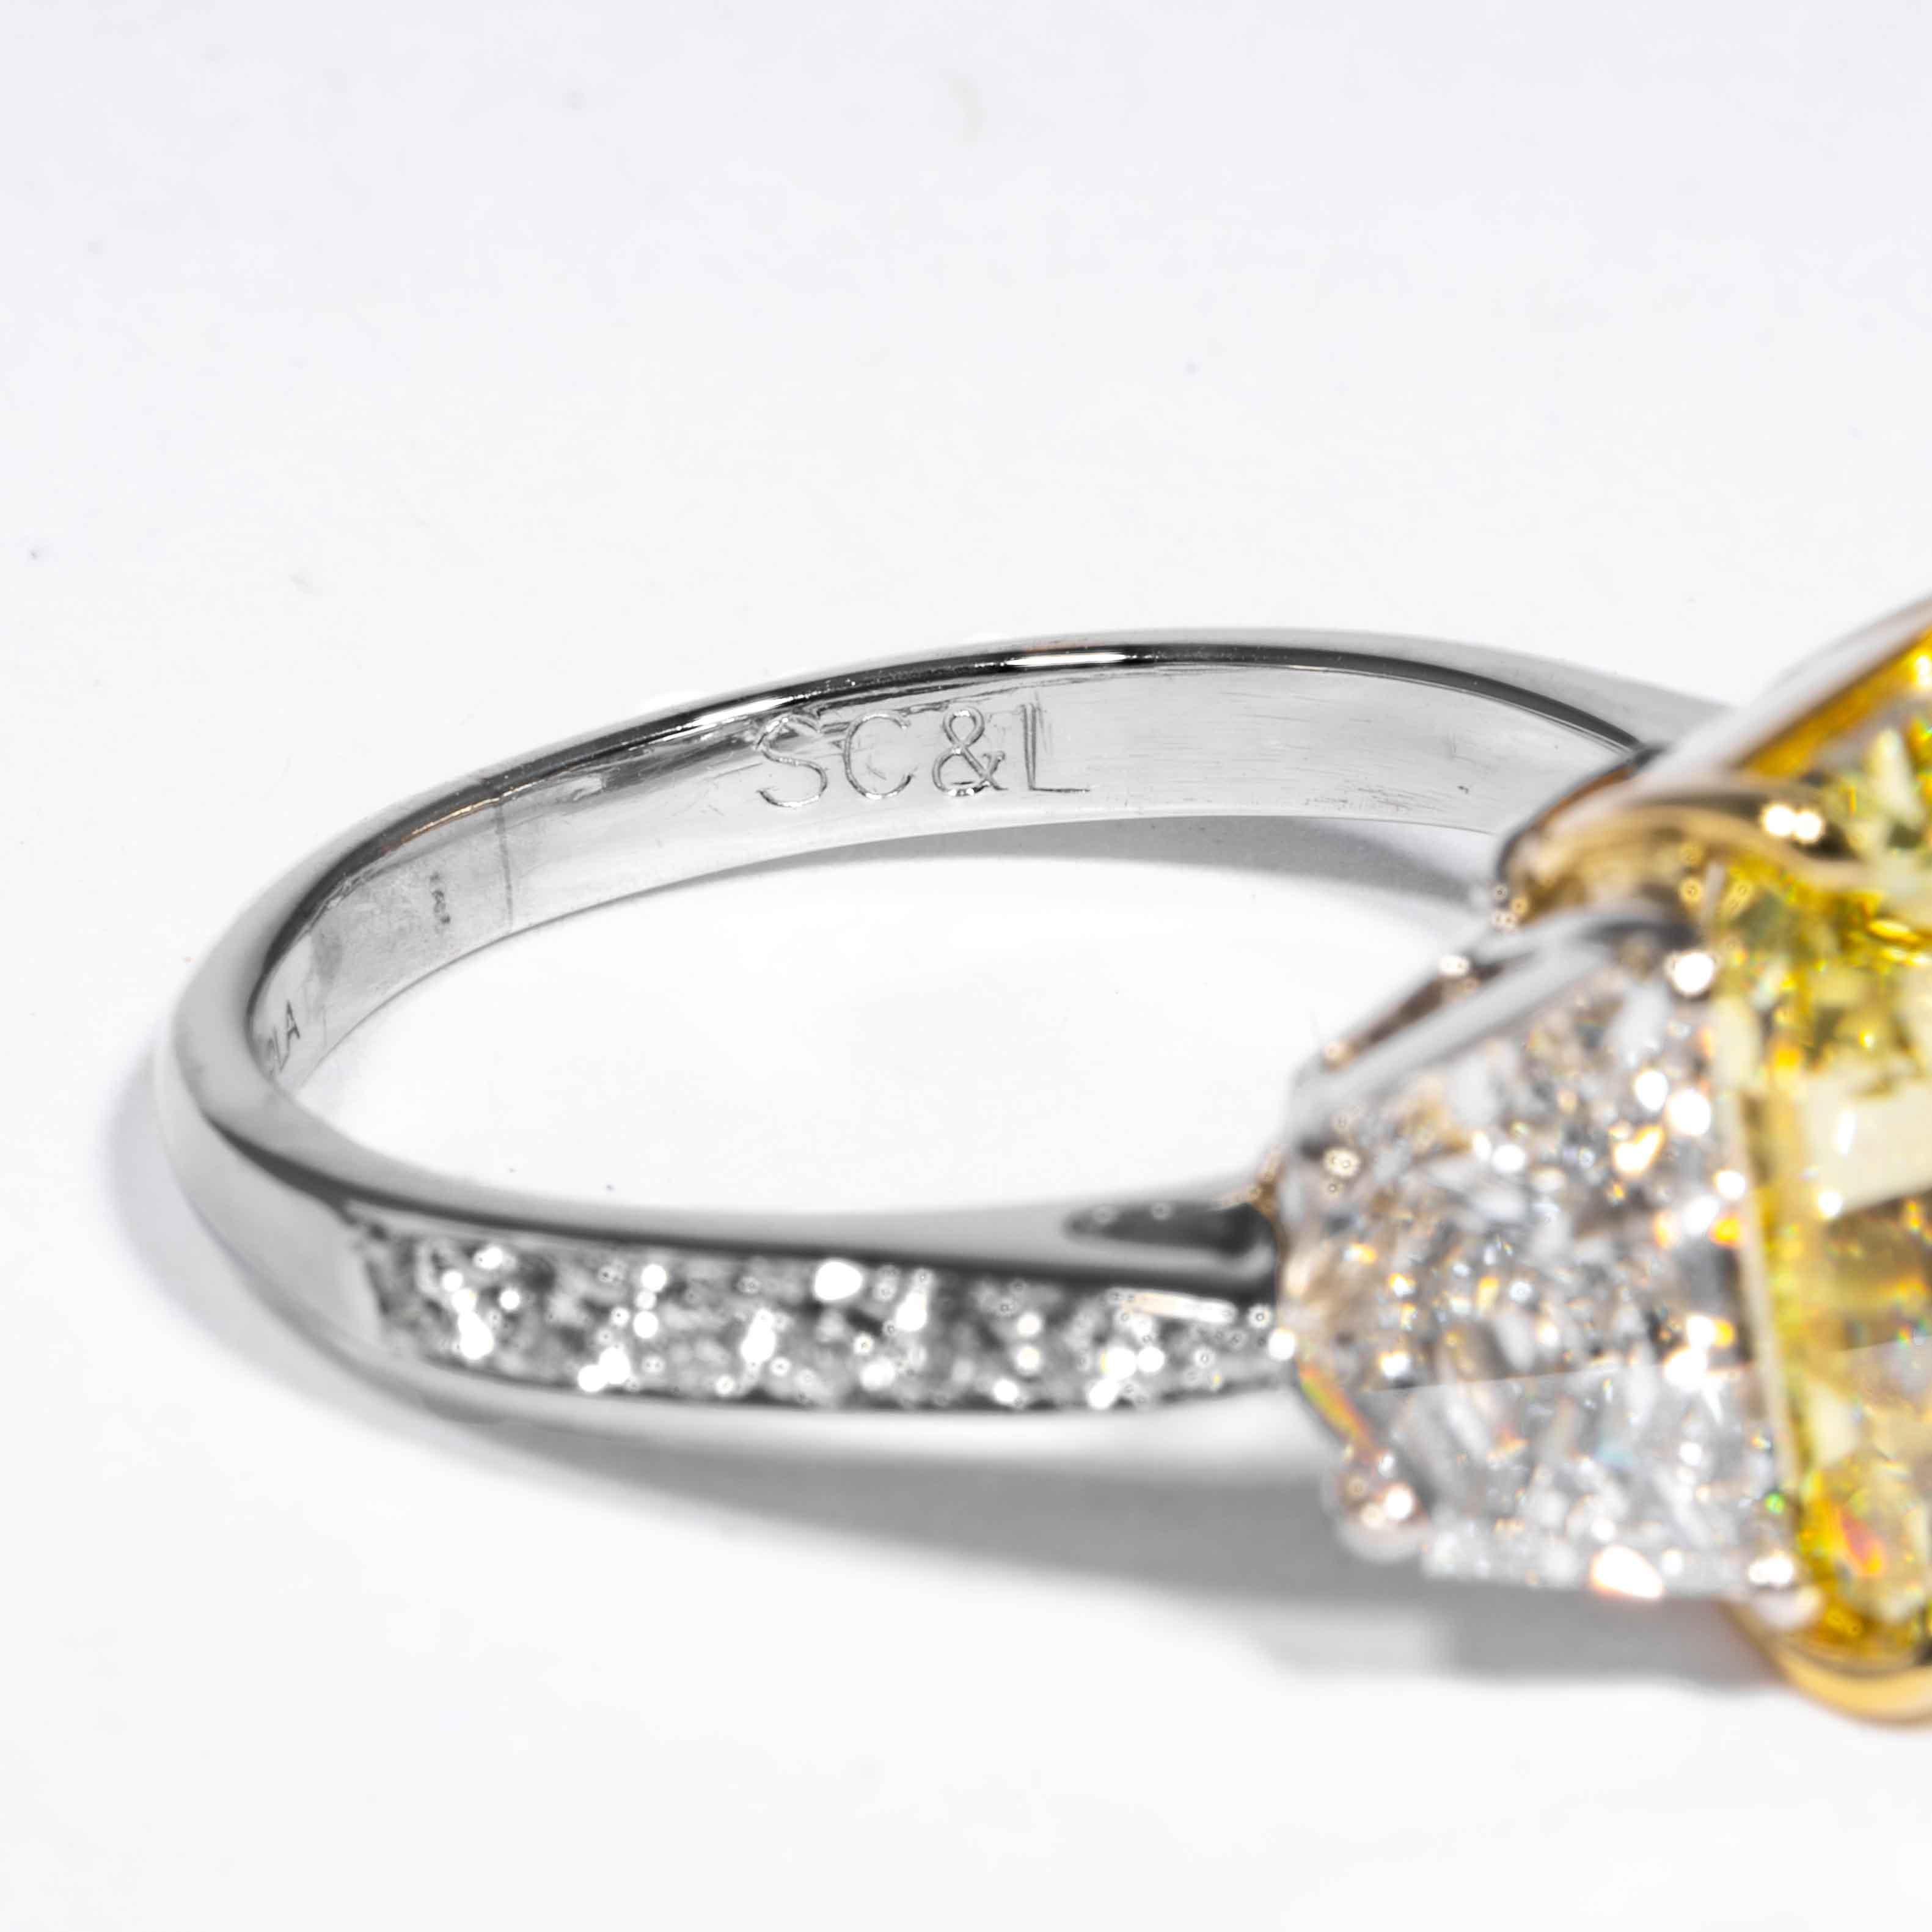 Shreve, Crump & Low GIA Certified 5.07 Carat Fancy Intense Yellow Diamond Ring In New Condition For Sale In Boston, MA